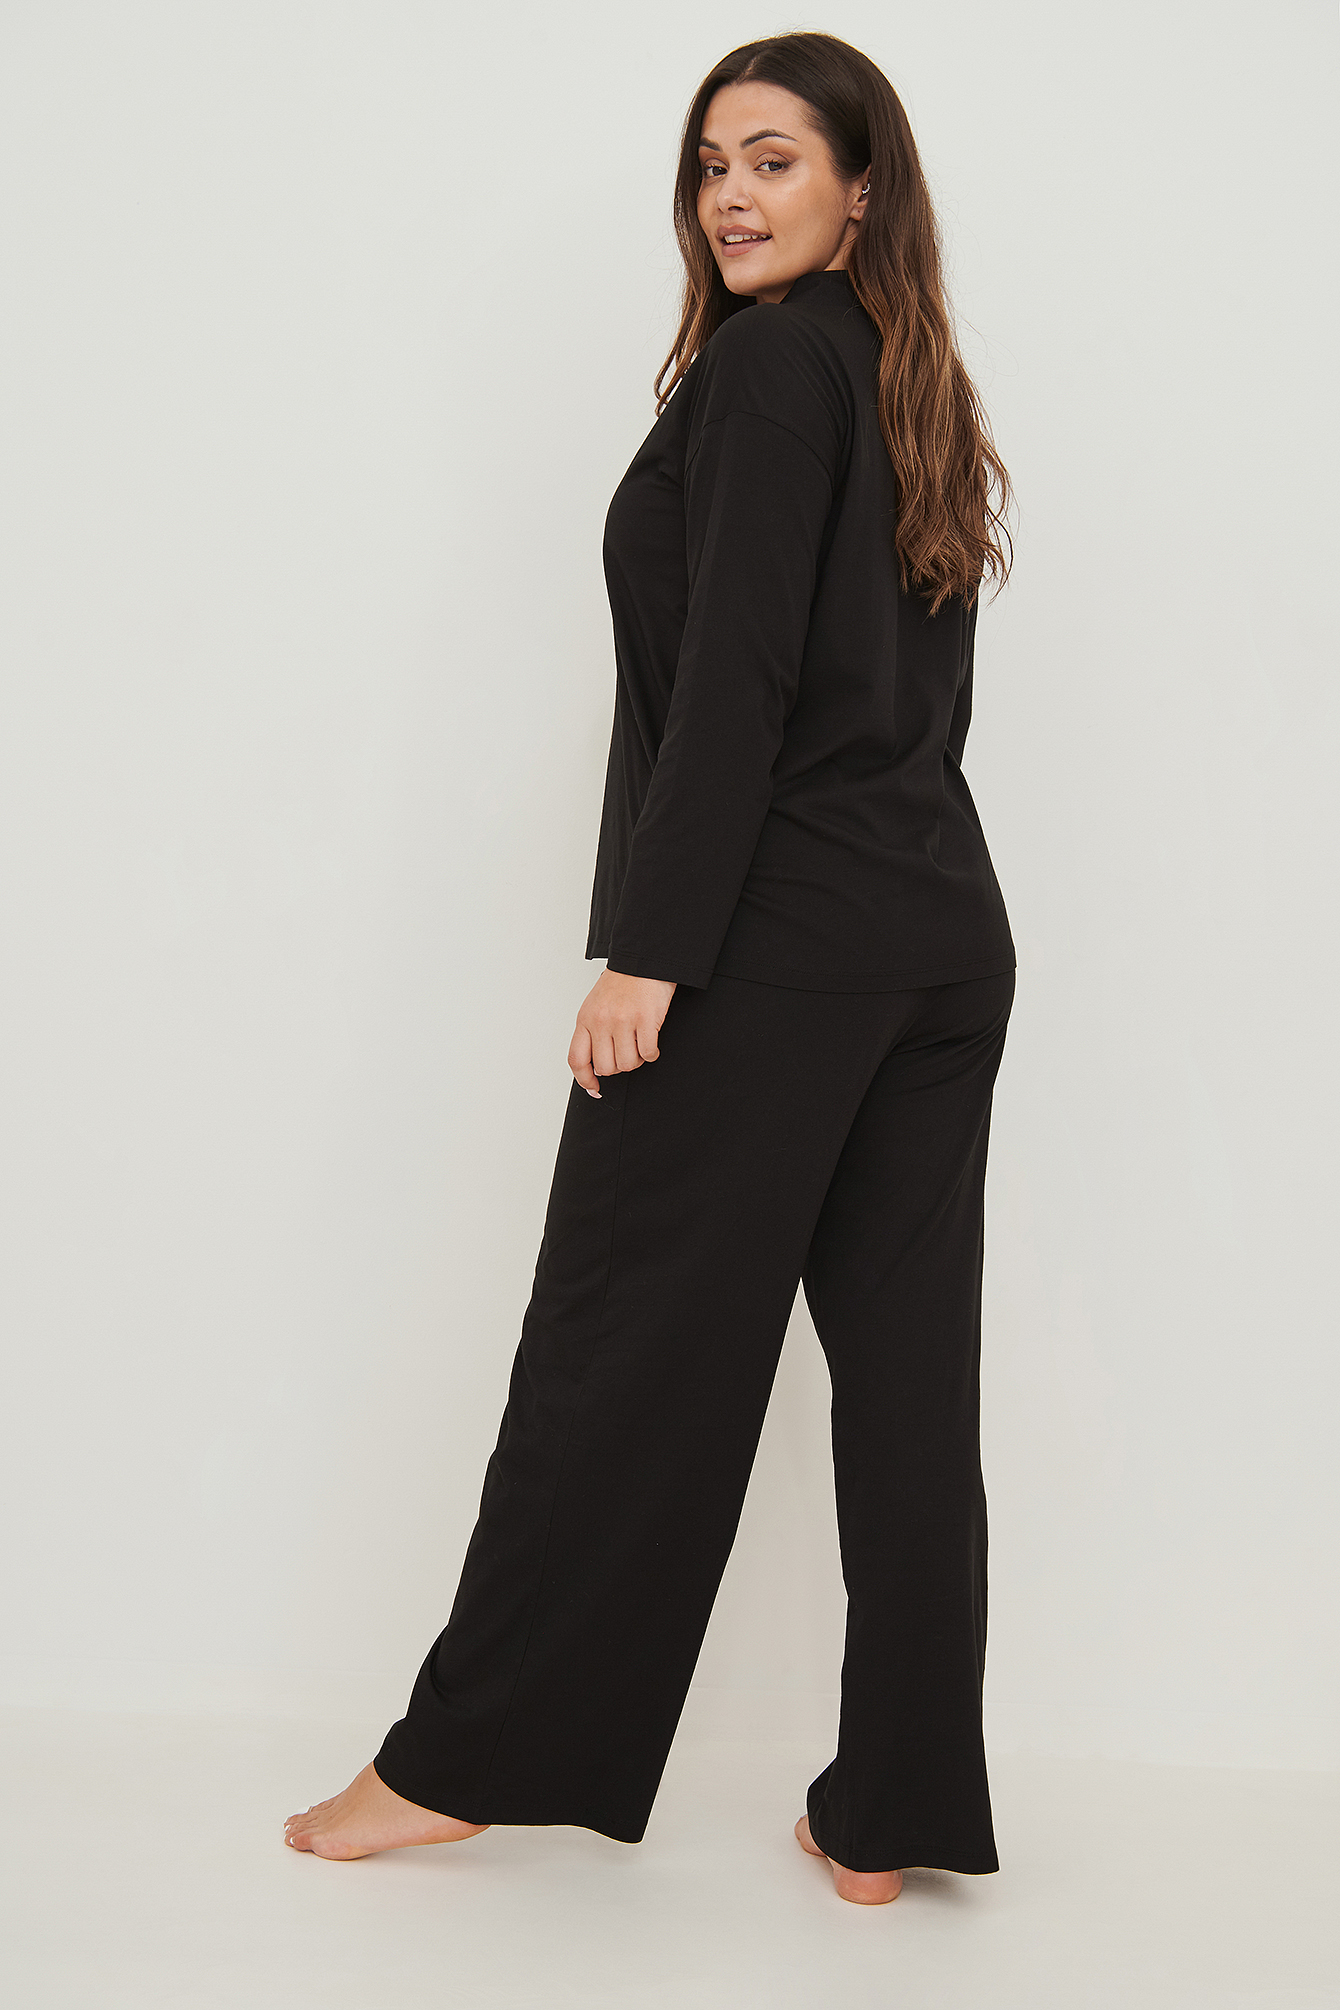 Slim pants Soft Surroundings Black size 4 US in Not specified - 27228598